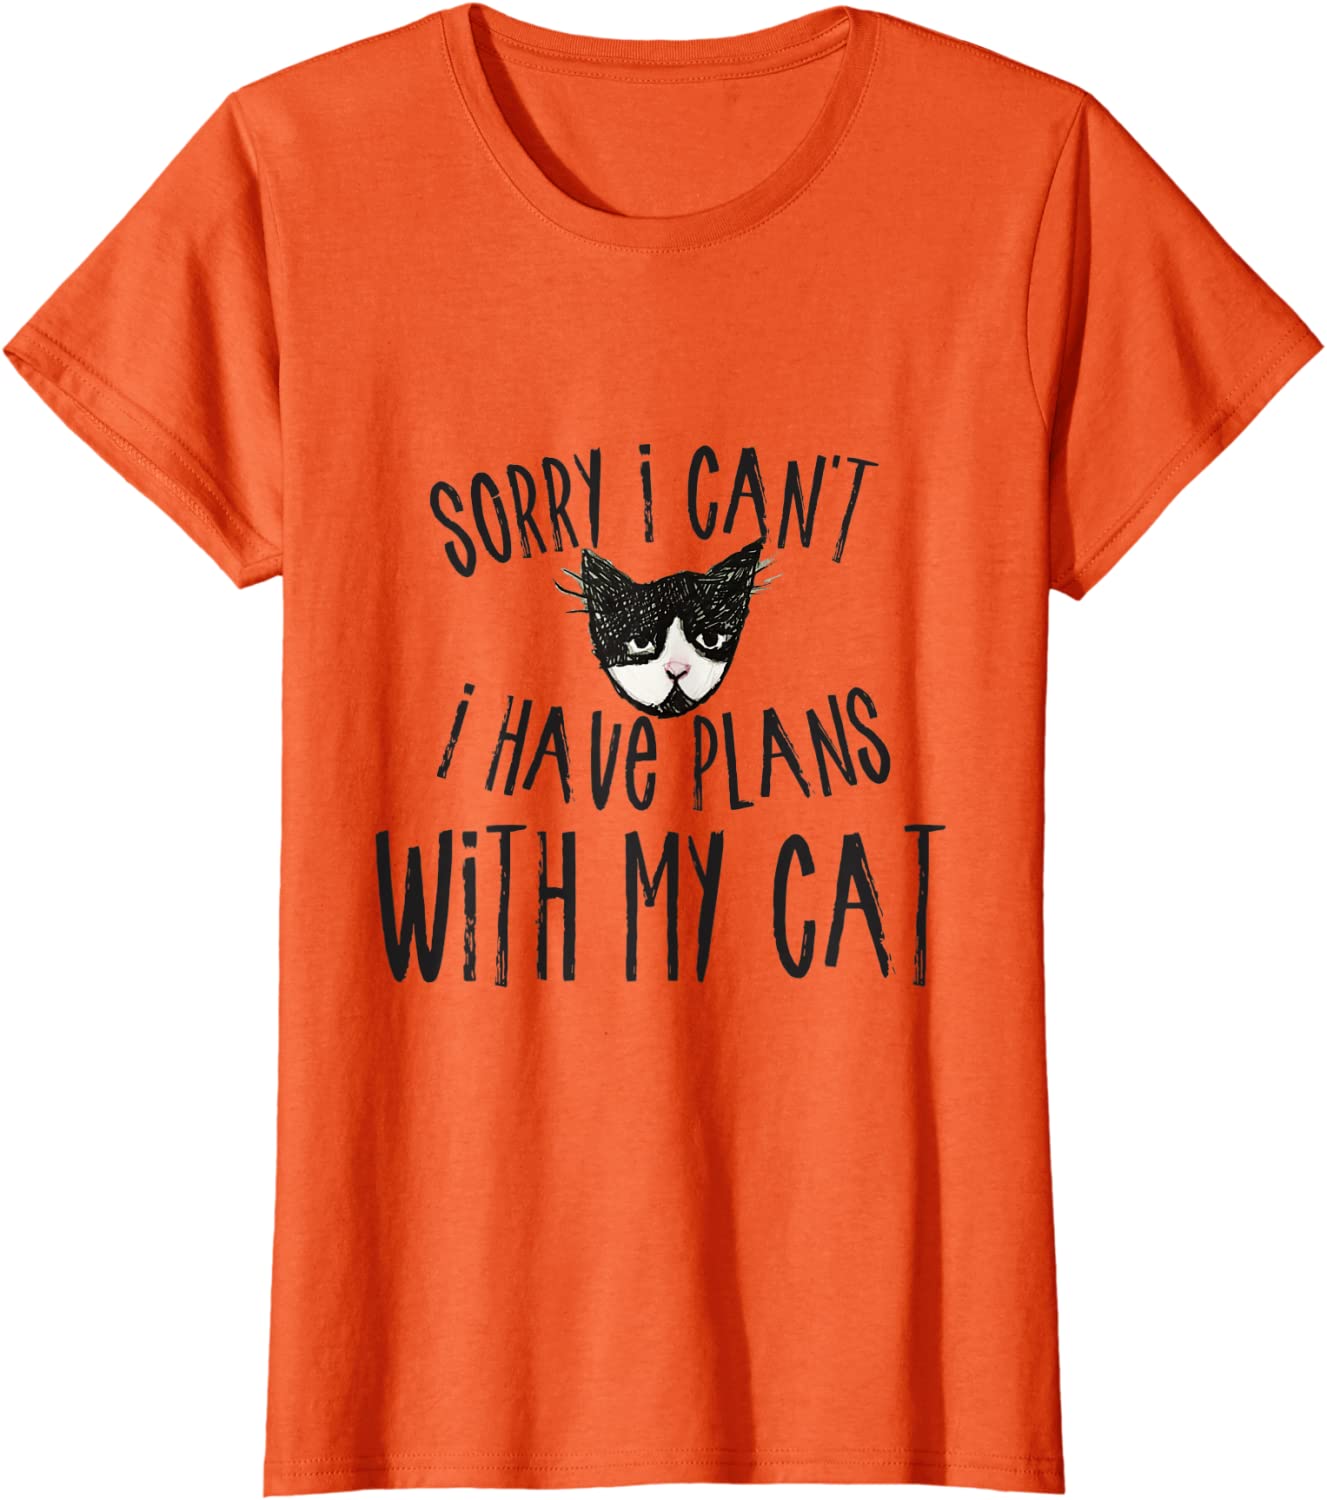 Sorry I can't I have plans with my Cat Kawaii T Shirt